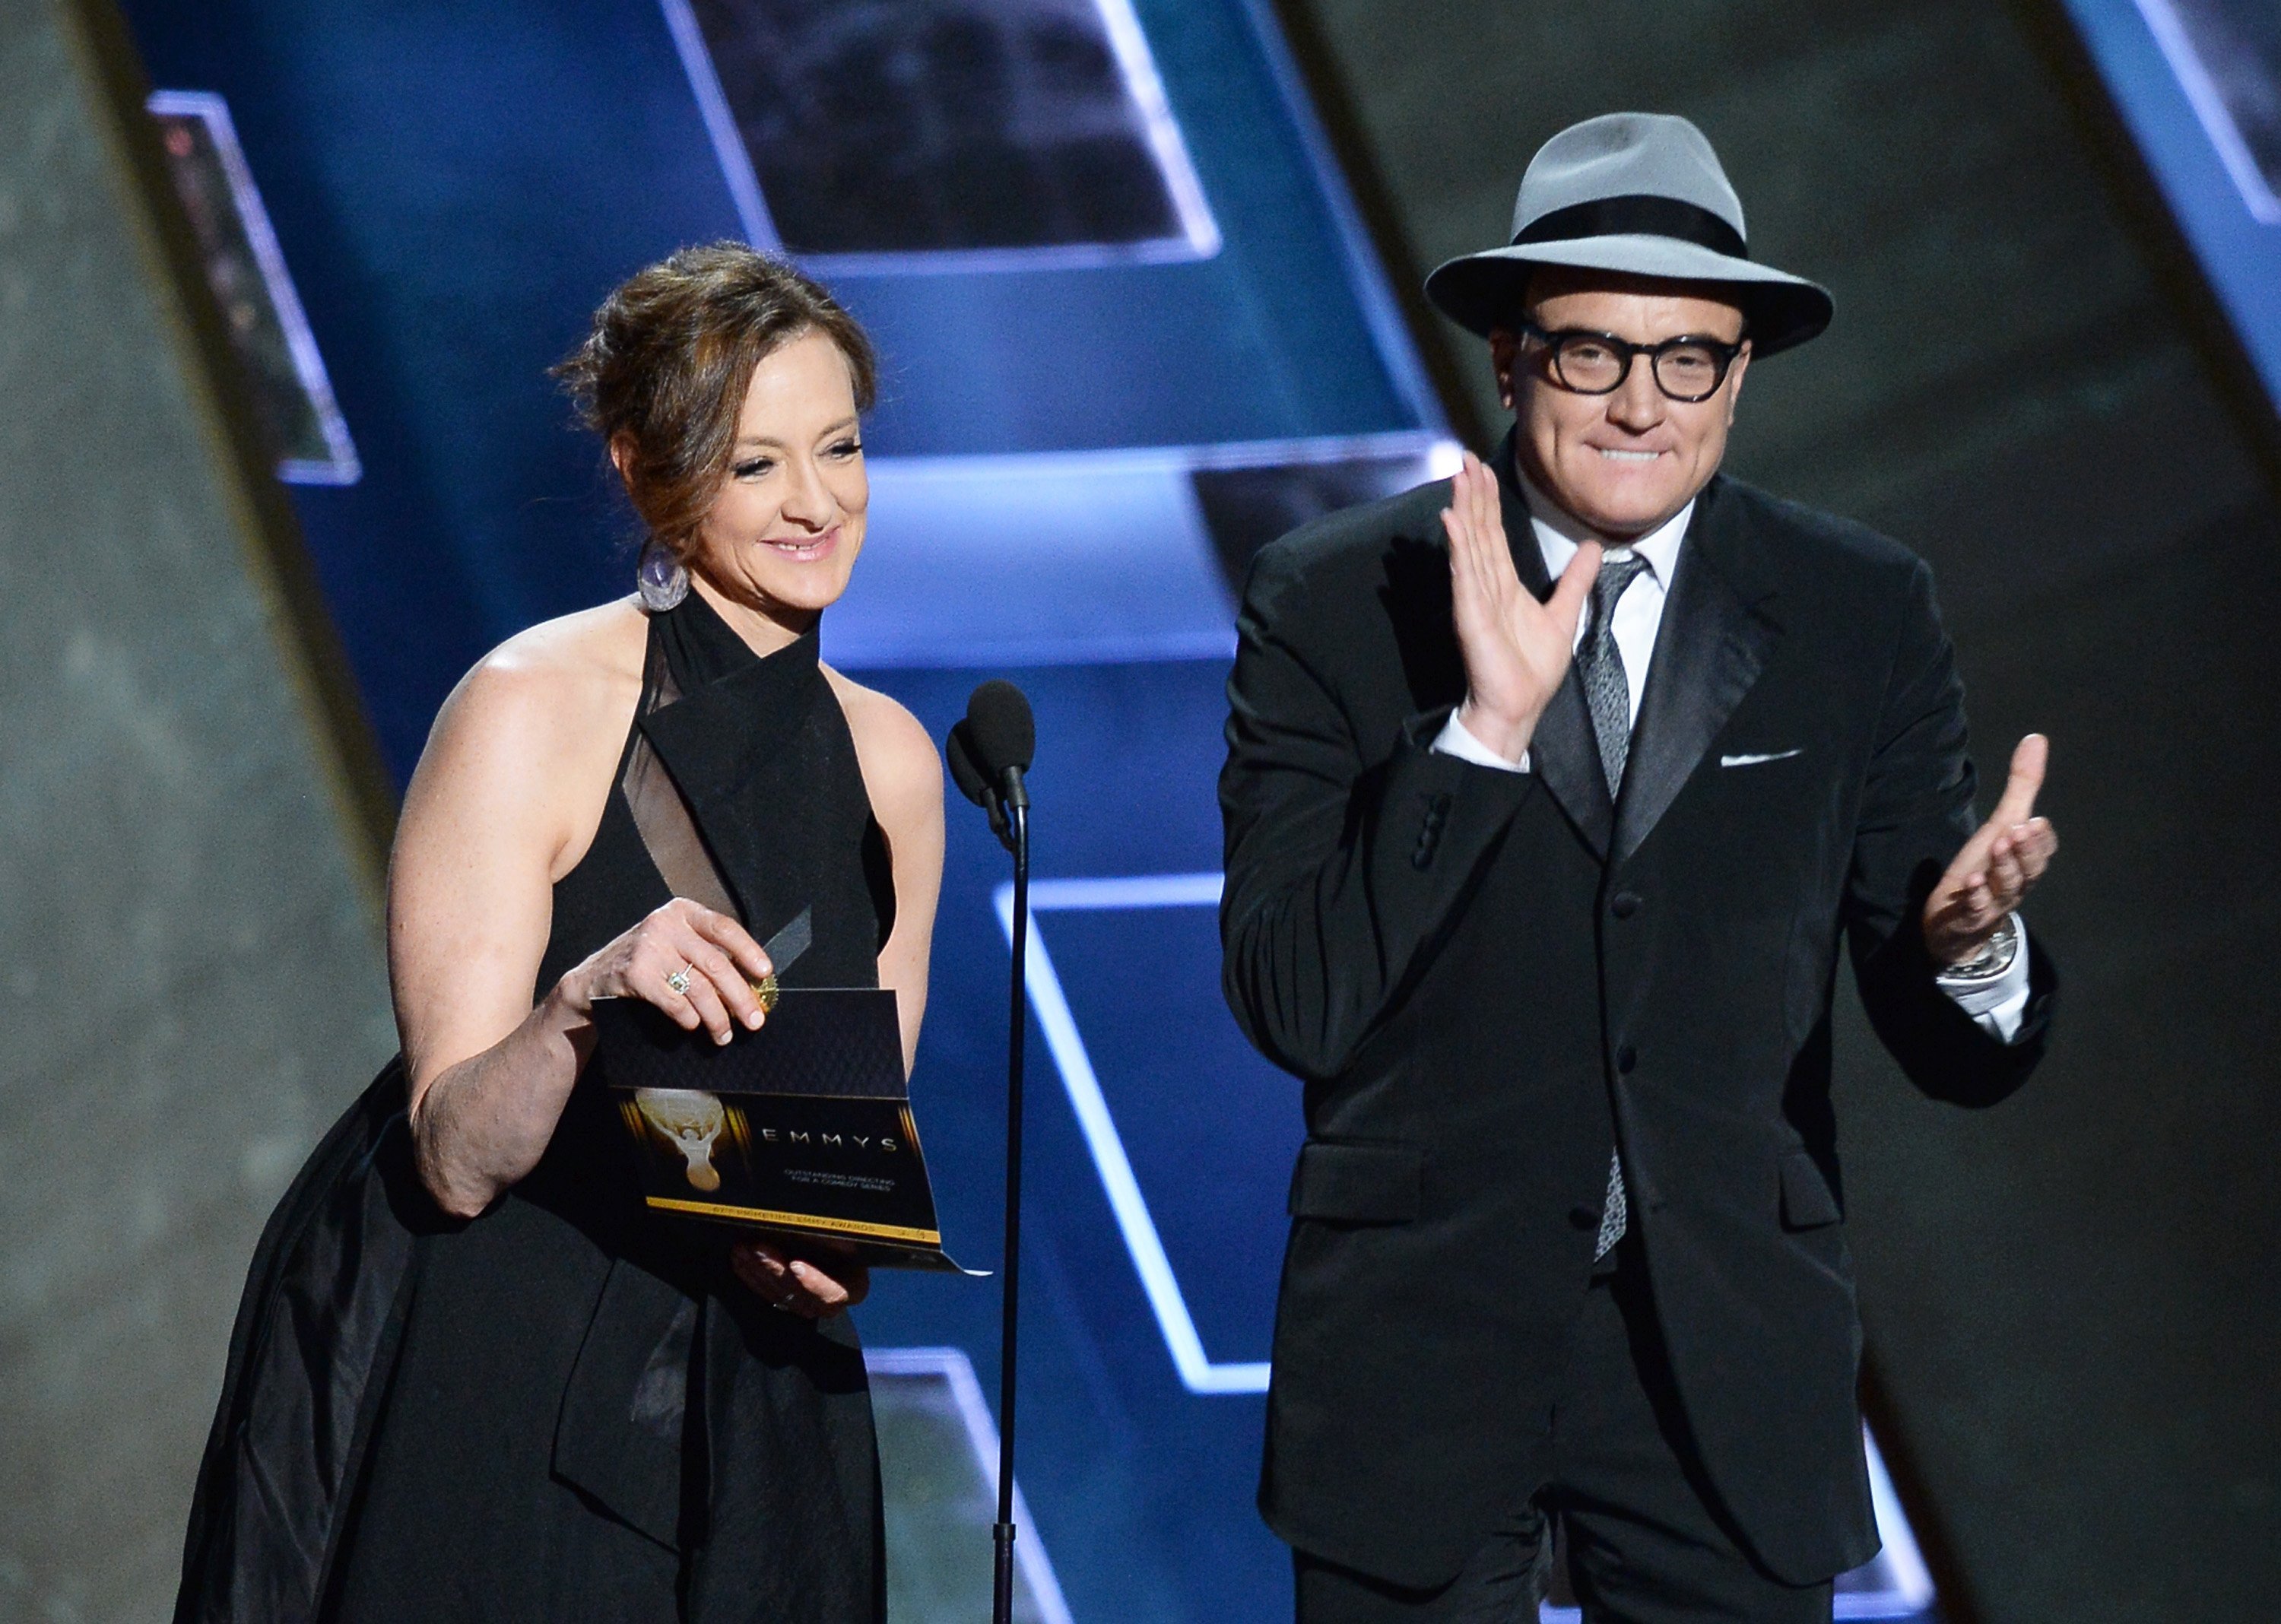 Joan Cusack (L) and actor Bradley Whitford speak onstage during the 67th Annual Primetime Emmy Awards at Microsoft Theater on September 20, 2015 | Photo: Getty Images